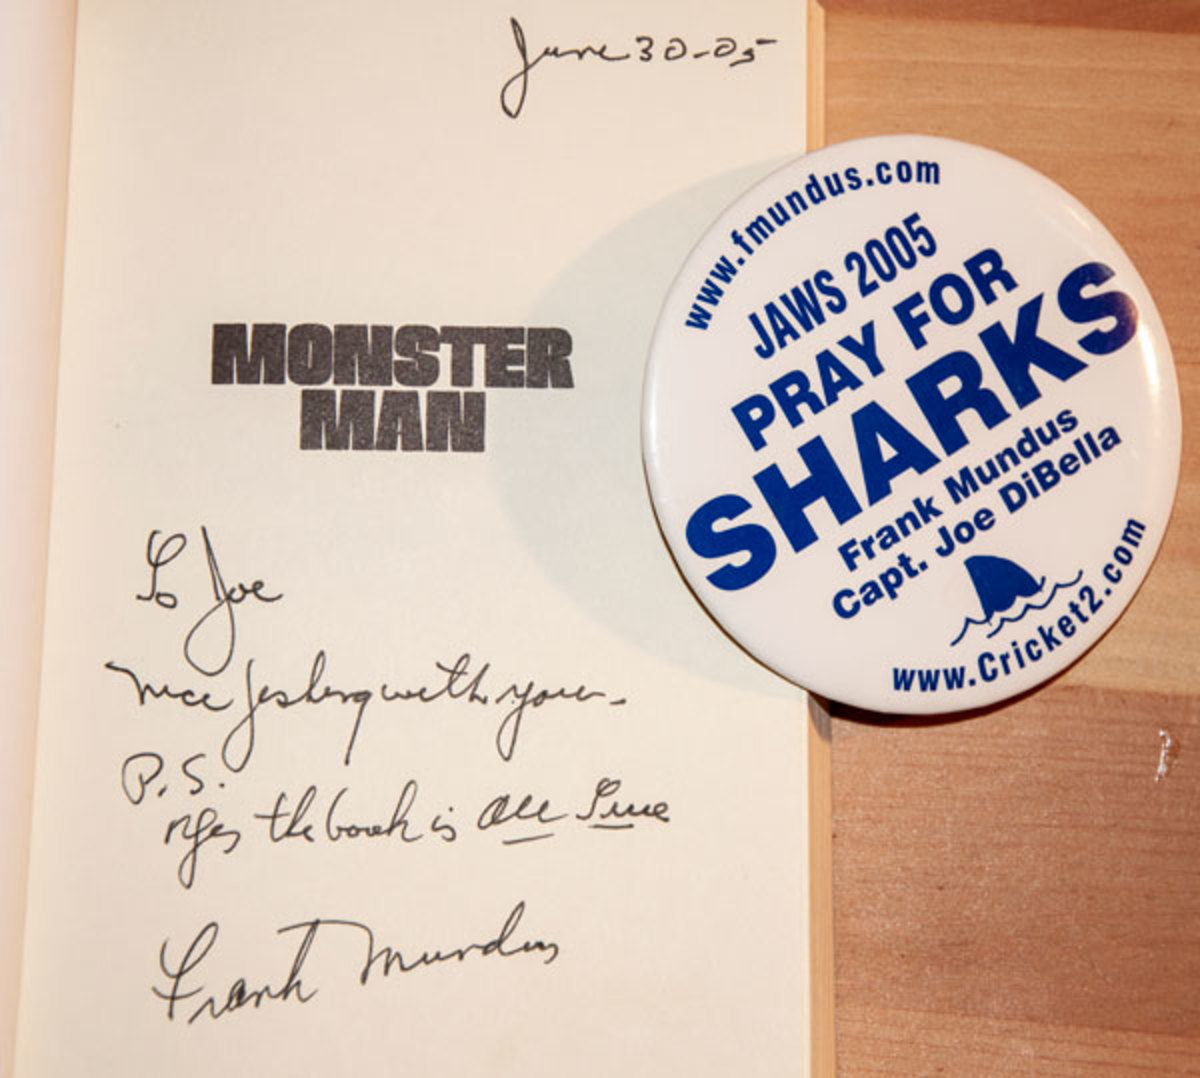 One of the author's cherished mementos is a signed copy of Monster Man and a button from the trip.